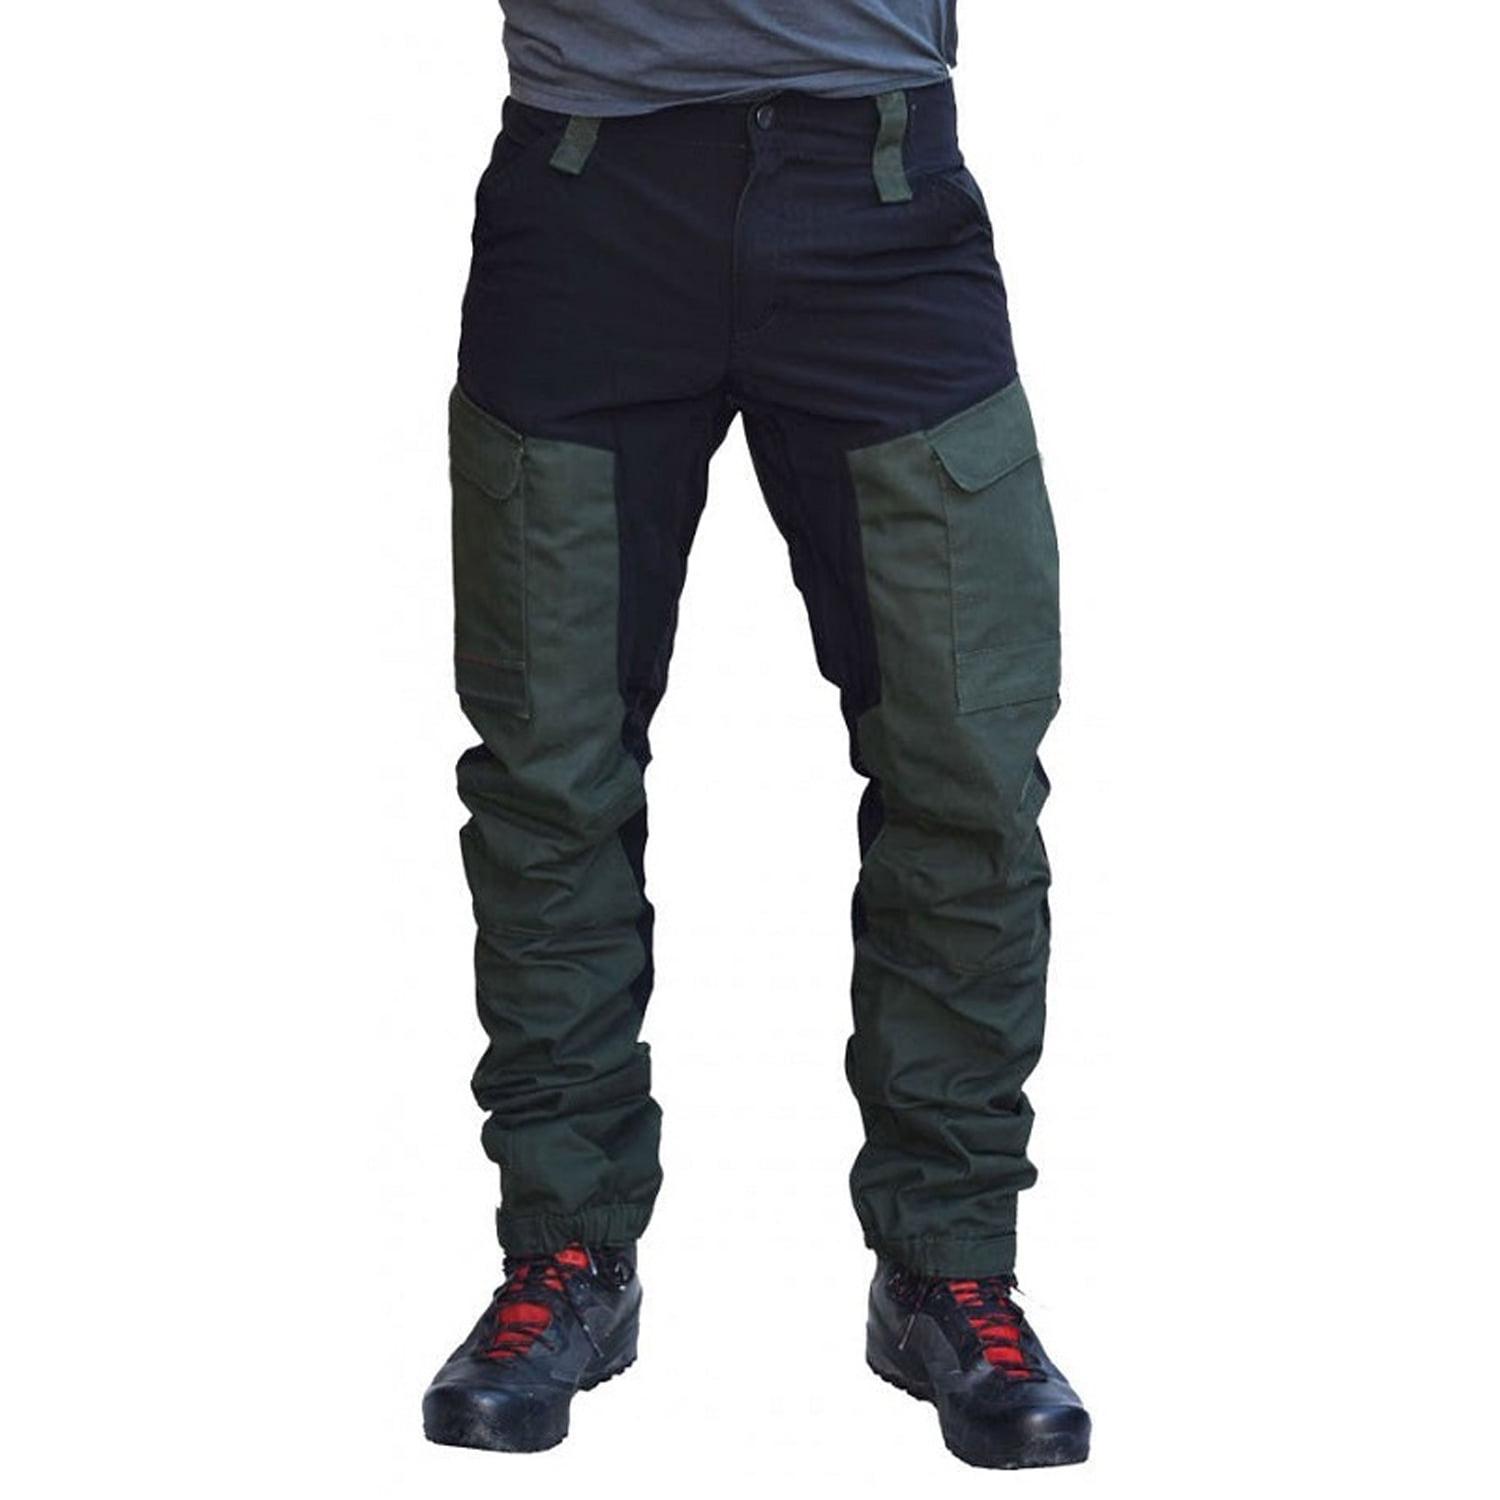 Men Tactical Waterproof Work Cargo Long Pants with Pockets Loose Trousers US